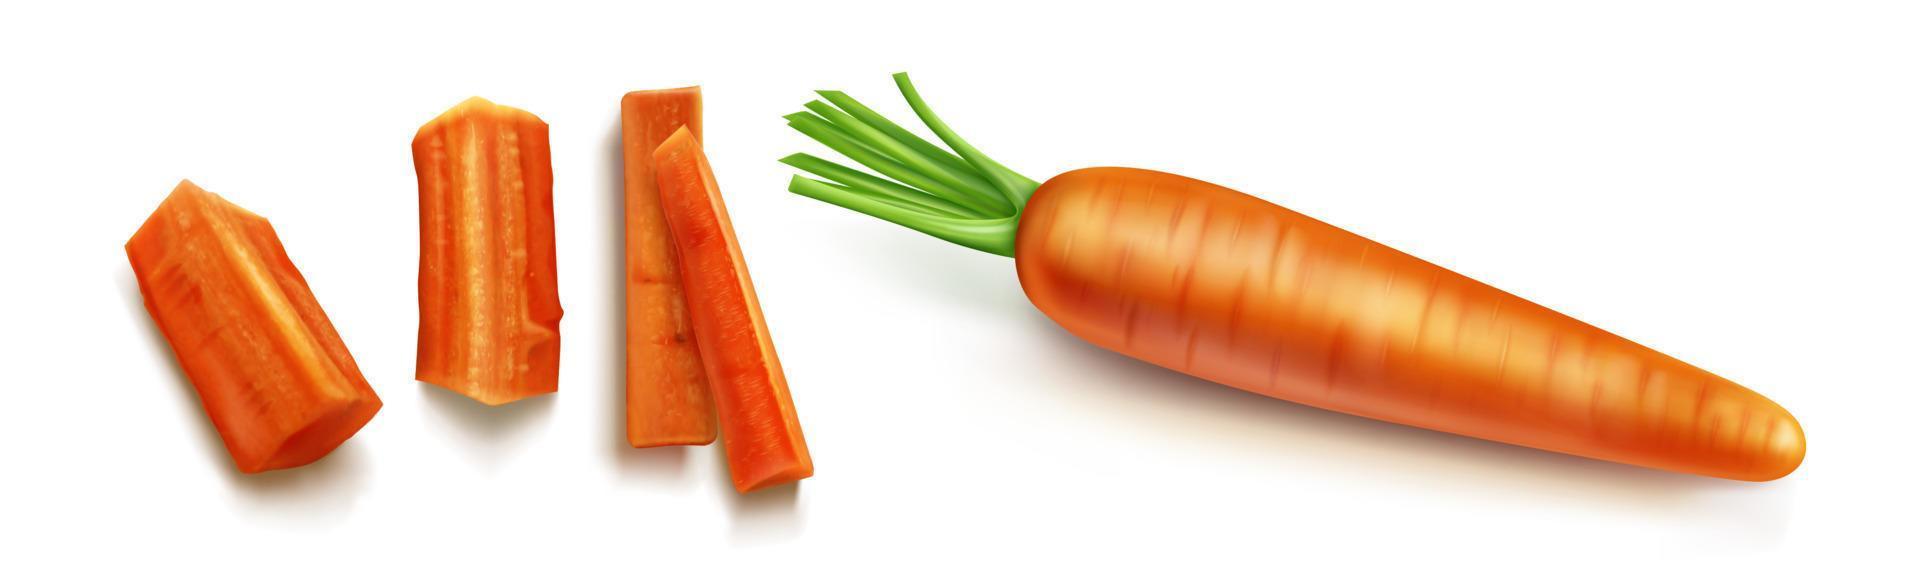 Carrot with green leaves vector isolated